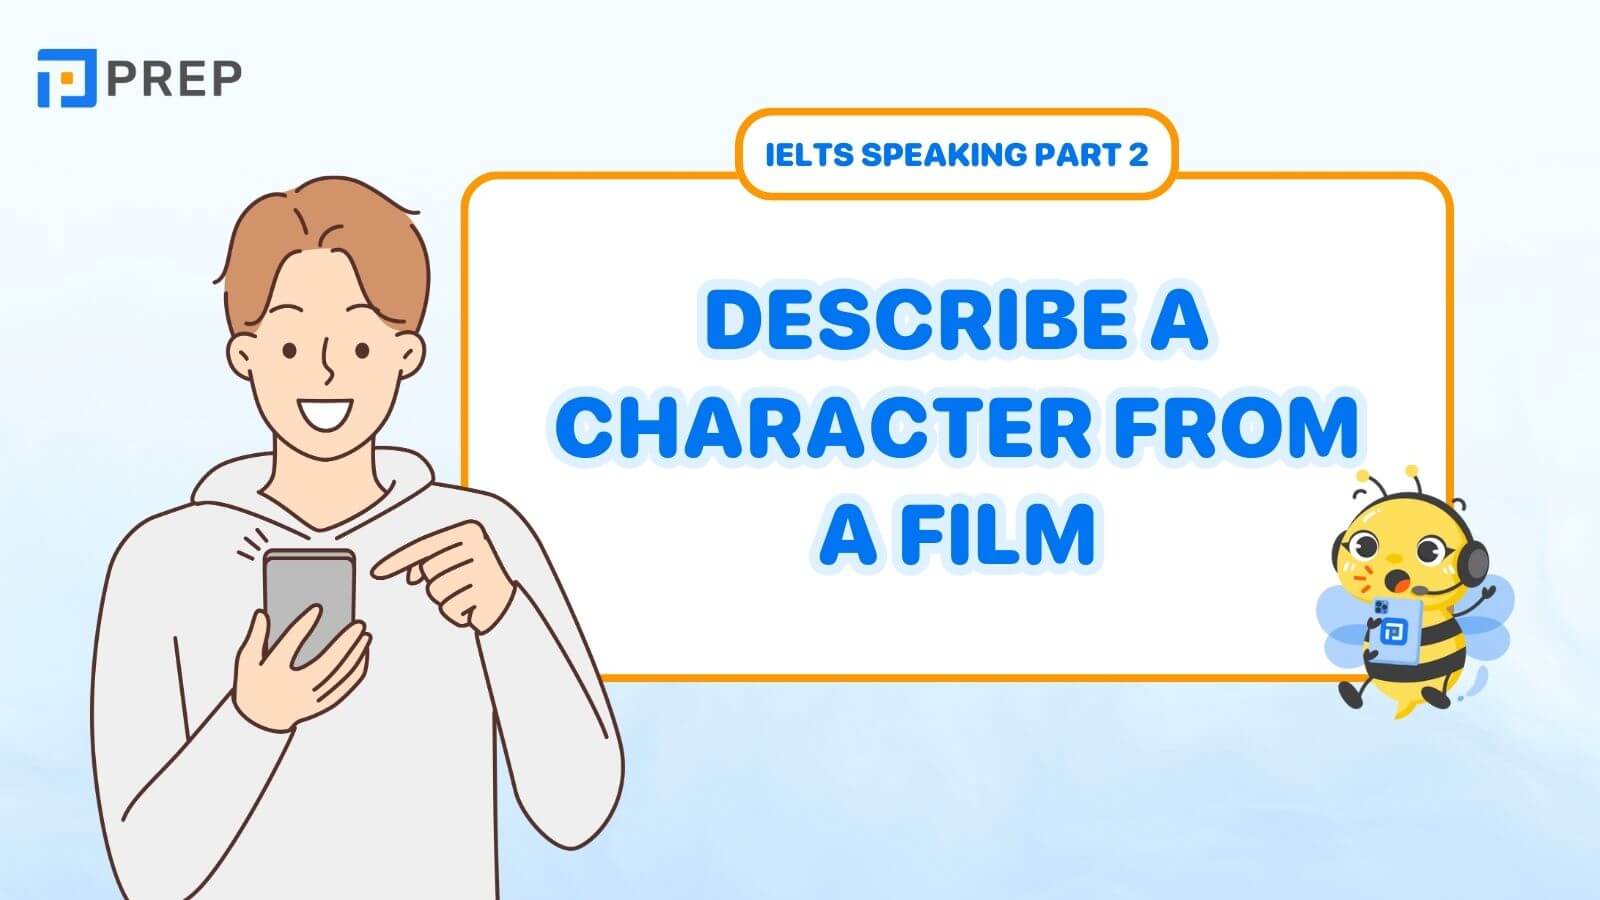 Describe a character from a film